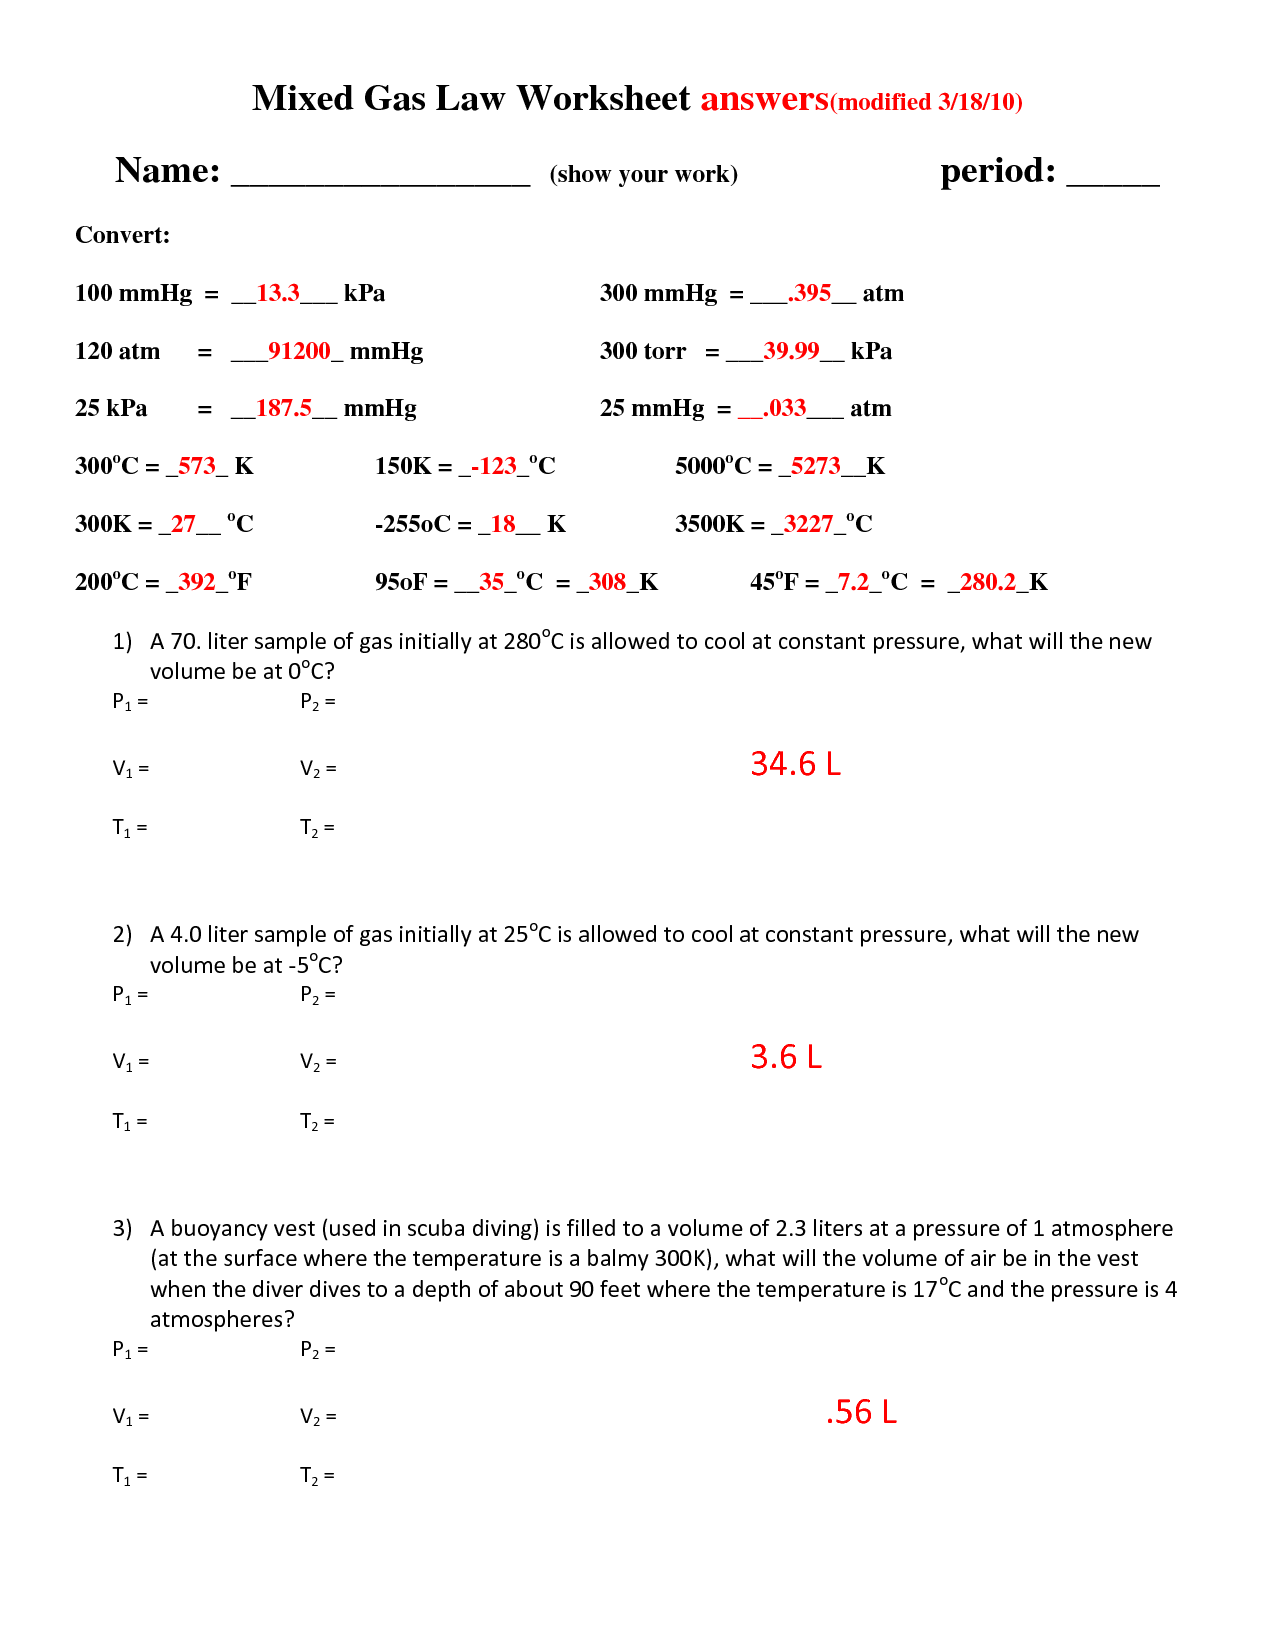 Mixed Gas Laws Worksheet Answers Image